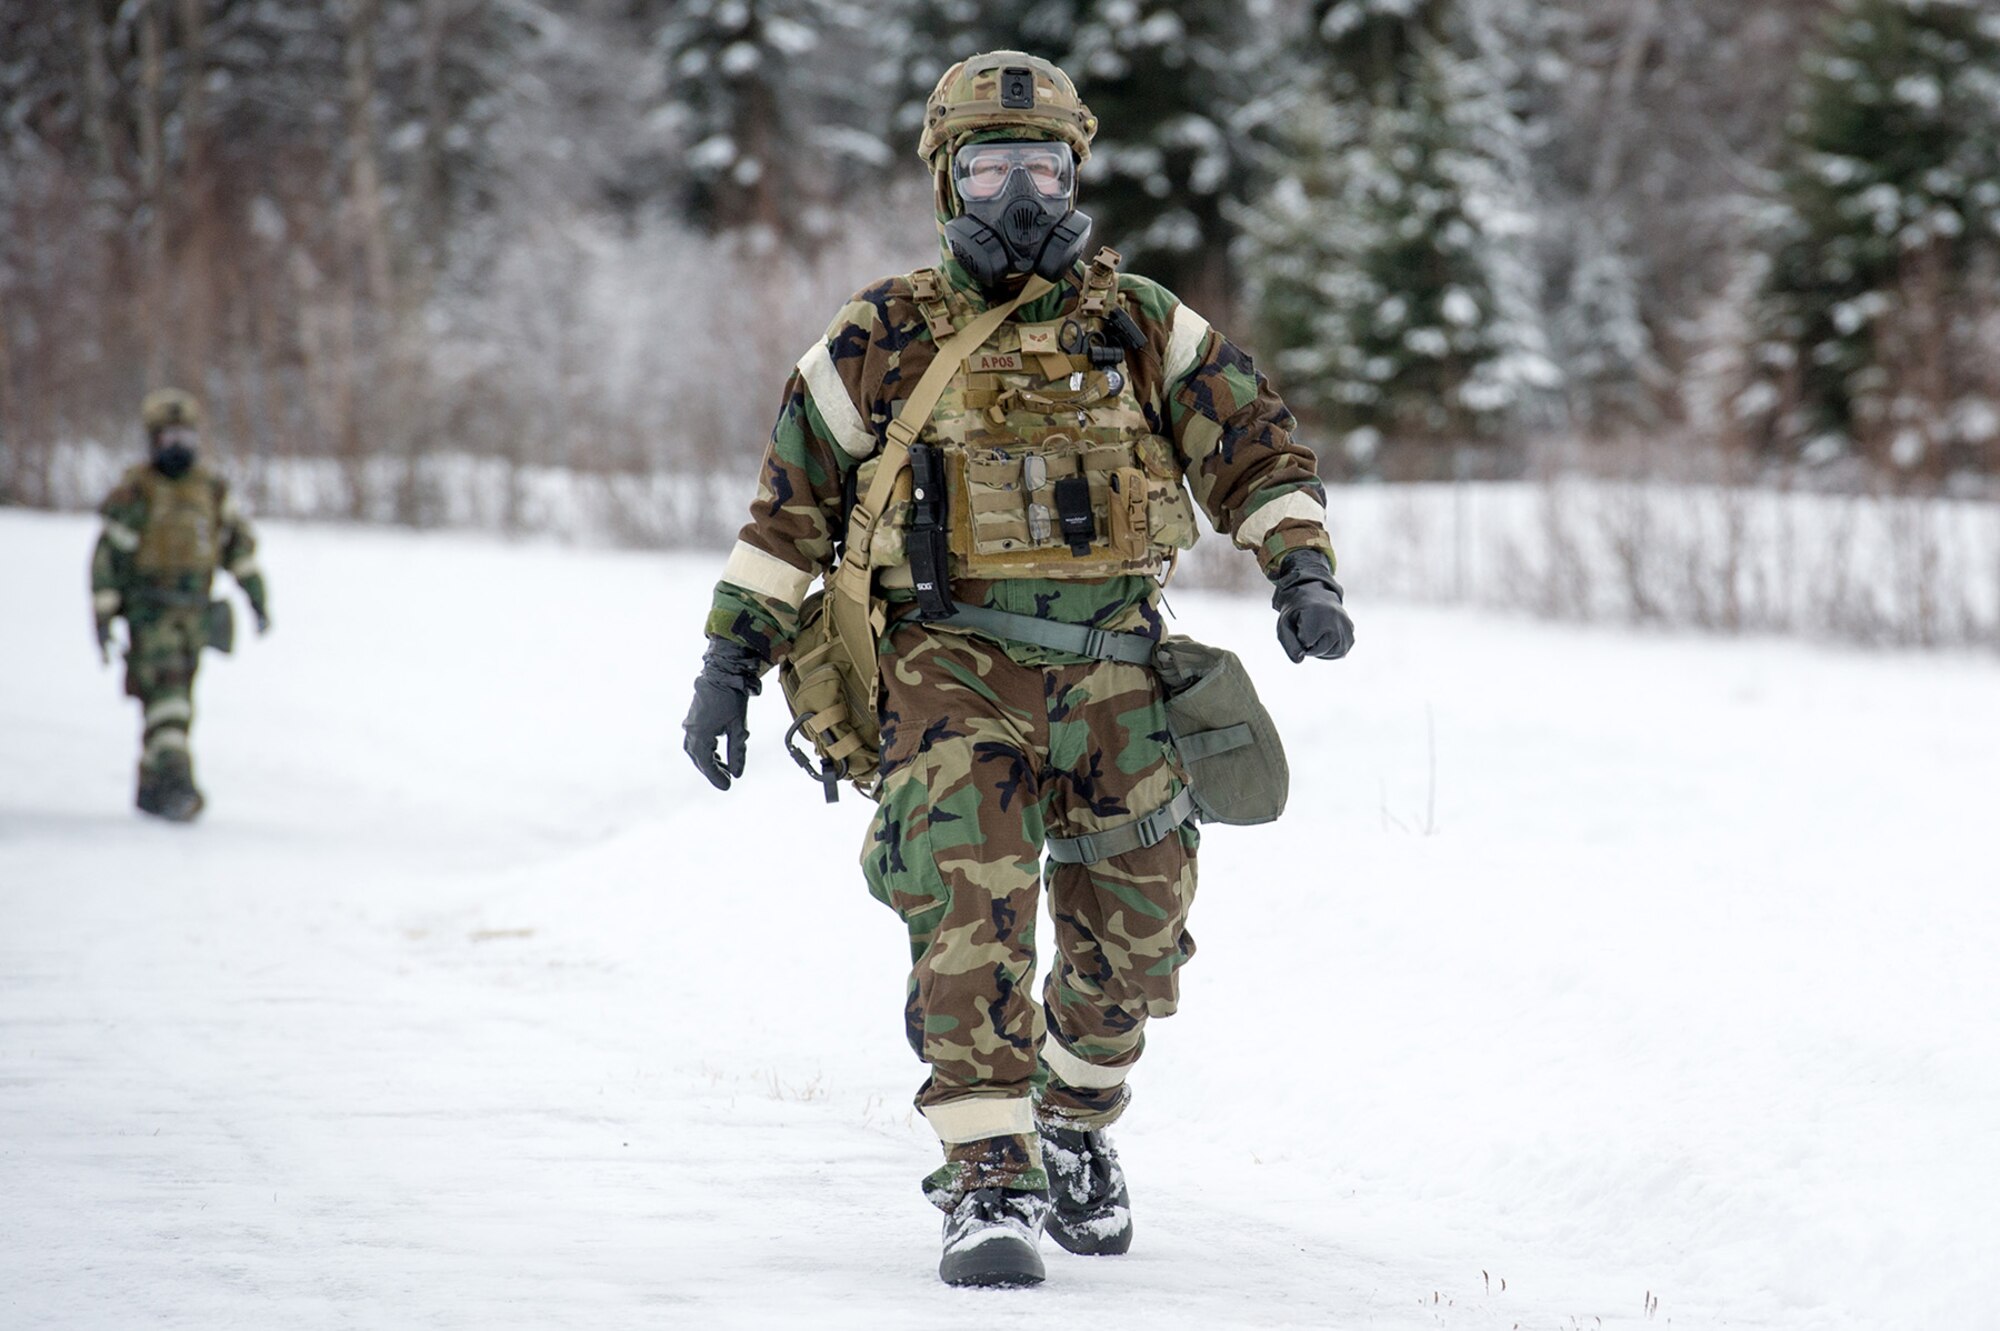 Senior Airman Michael Carlson, assigned to the 673d Civil Engineer Squadron, Explosives Ordinance Disposal Flight, walks of the range prior to conducting a live-fire demolitions exercise in Mission Oriented Protective Posture 4 on Joint Base Elmendorf-Richardson, Alaska, Feb.14, 2018.  The Airmen were conducting EOD training in a simulated chemical weapons contaminated environment.